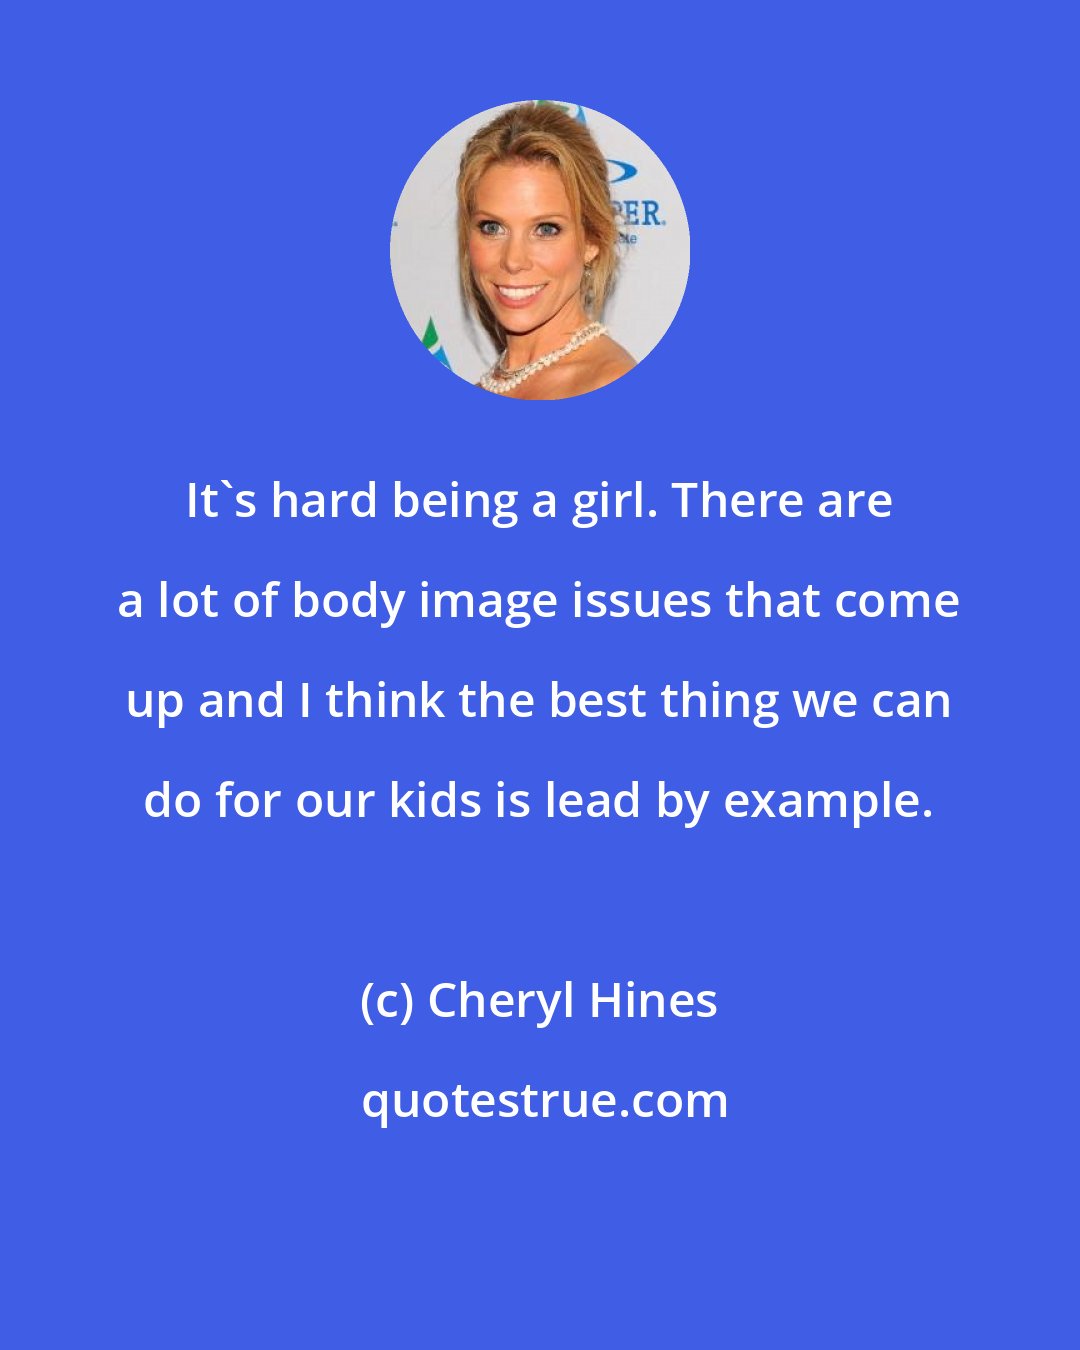 Cheryl Hines: It's hard being a girl. There are a lot of body image issues that come up and I think the best thing we can do for our kids is lead by example.